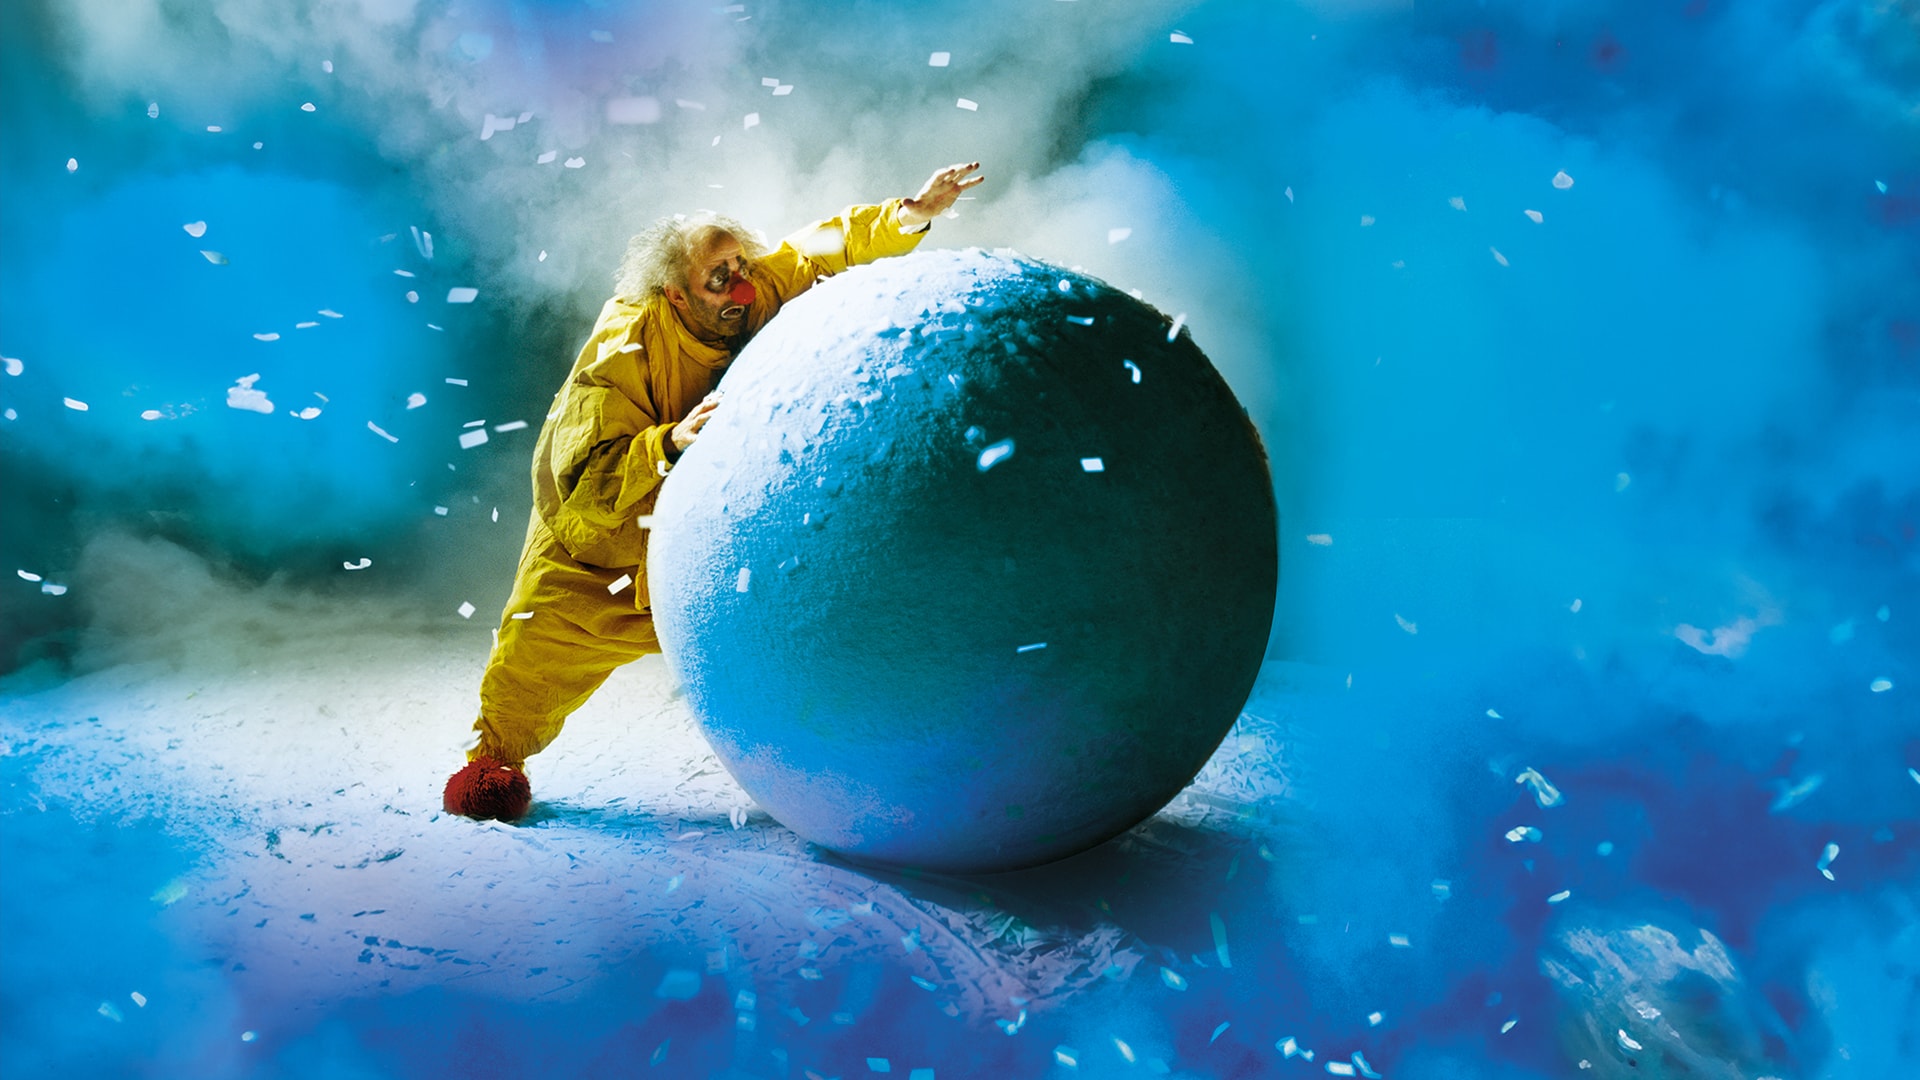 “Slava’s Snowshow” adds two performances to upcoming Toronto holiday run